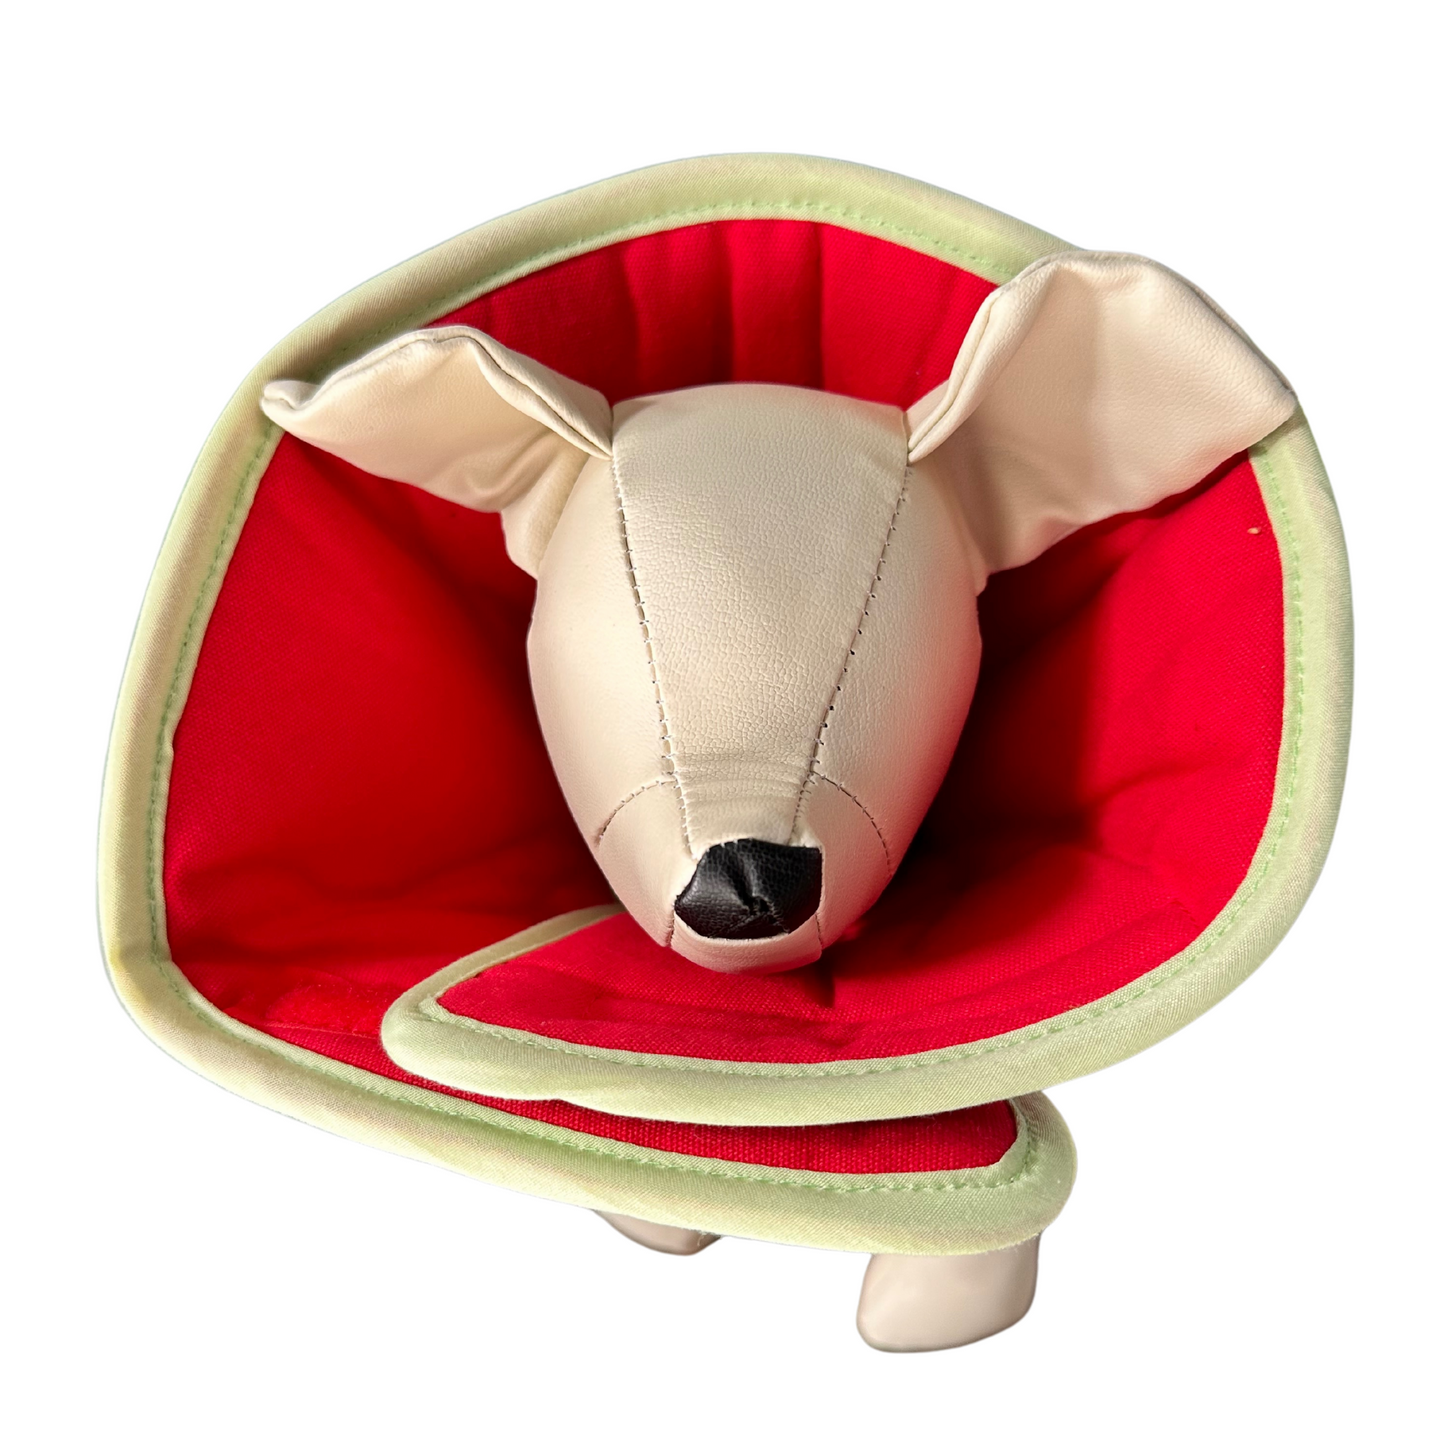 Plush Elizabethan Recovery Cone Collar | Cats and Toy Dogs | Watermelon